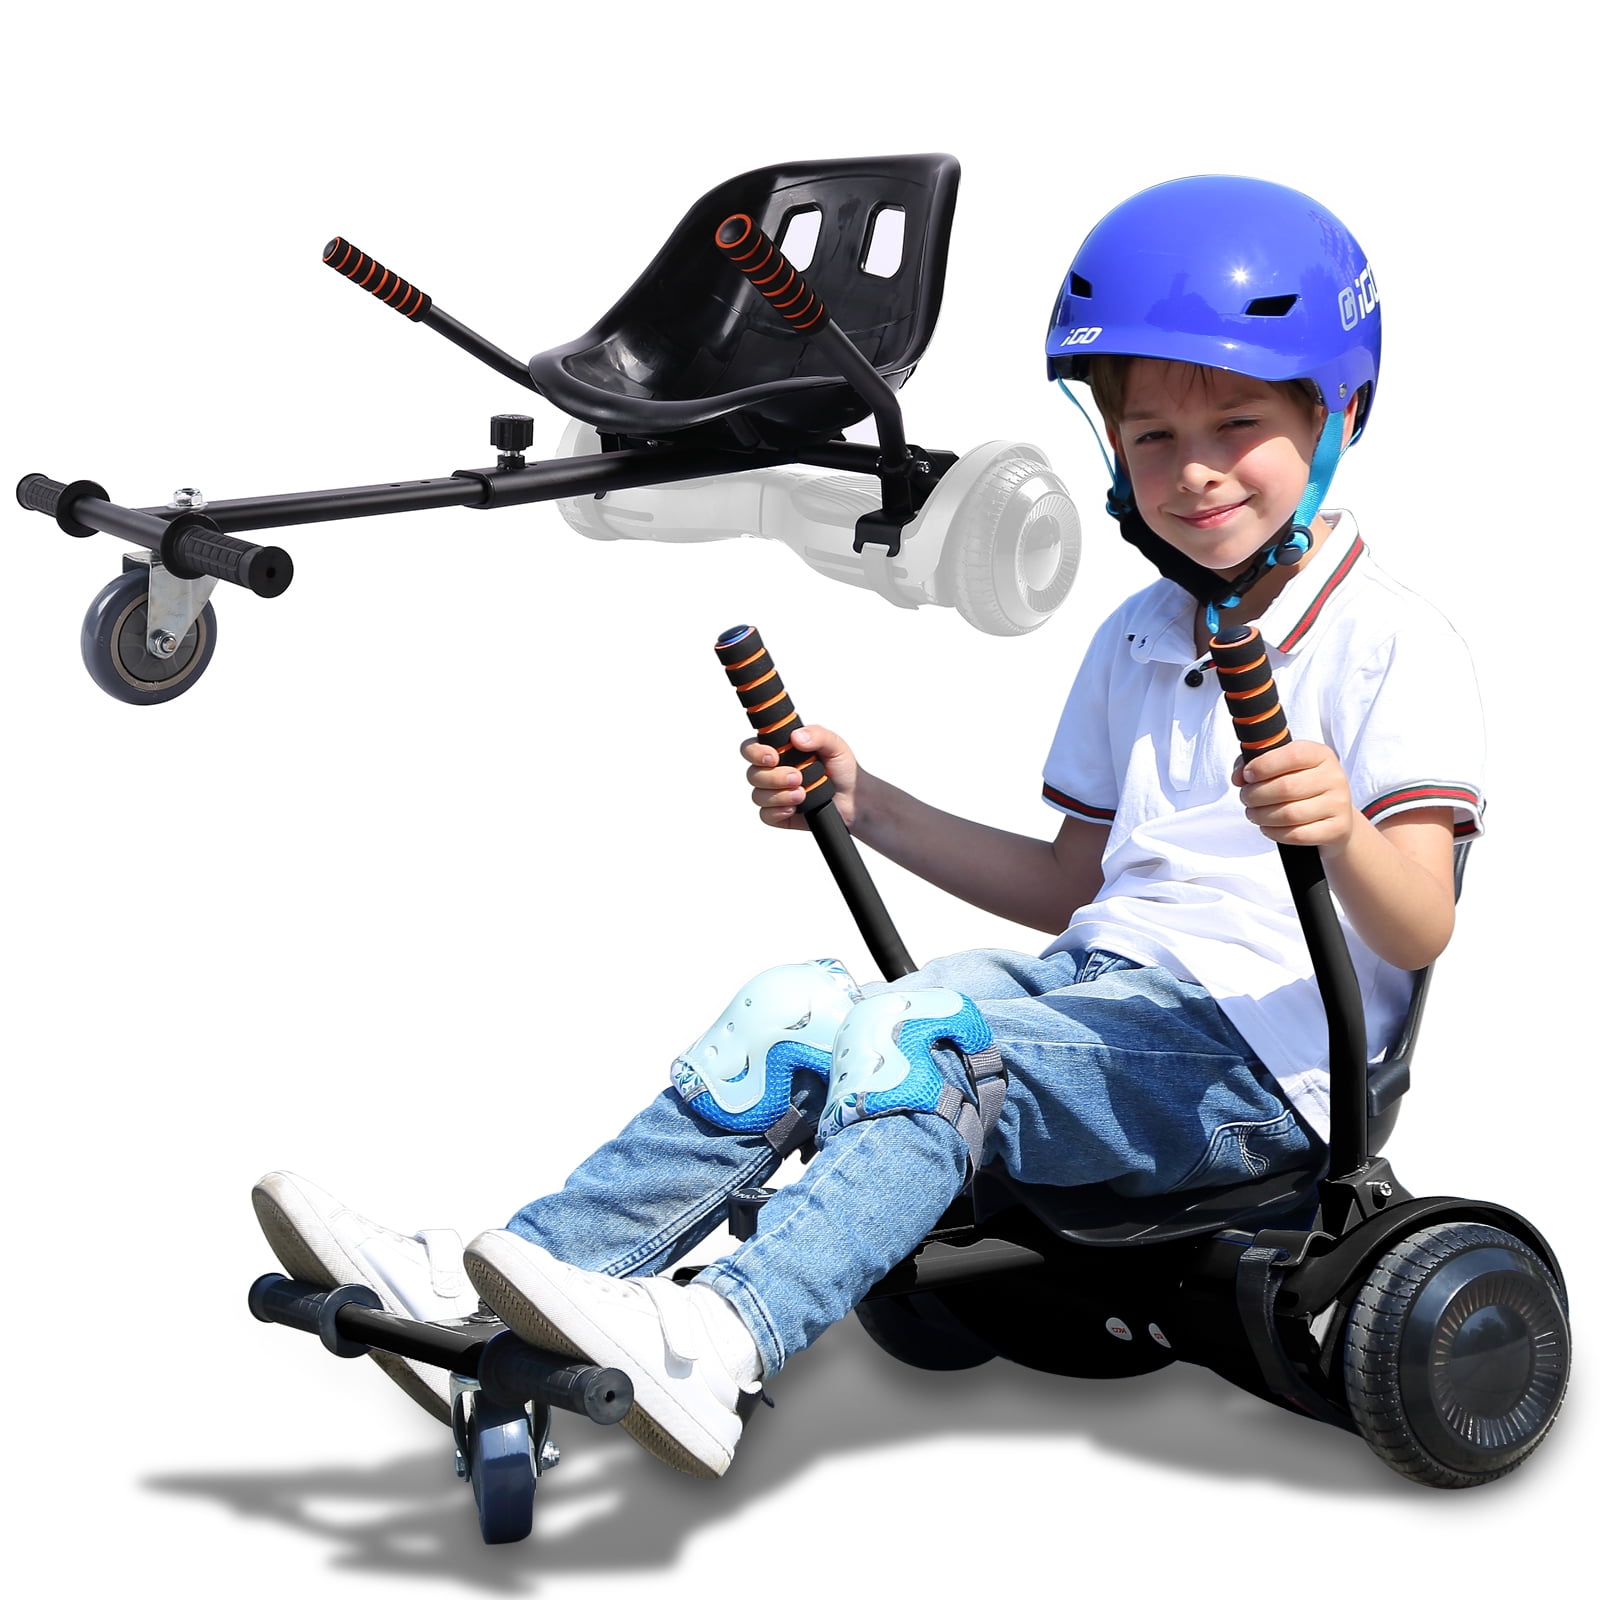 All Ages All Heights Compatible with All Hoverboards HoverBoard Not Included Fastwheel Safer For Kids Self Balancing Scooter Go Kart Conversion Kit for Hoverboards